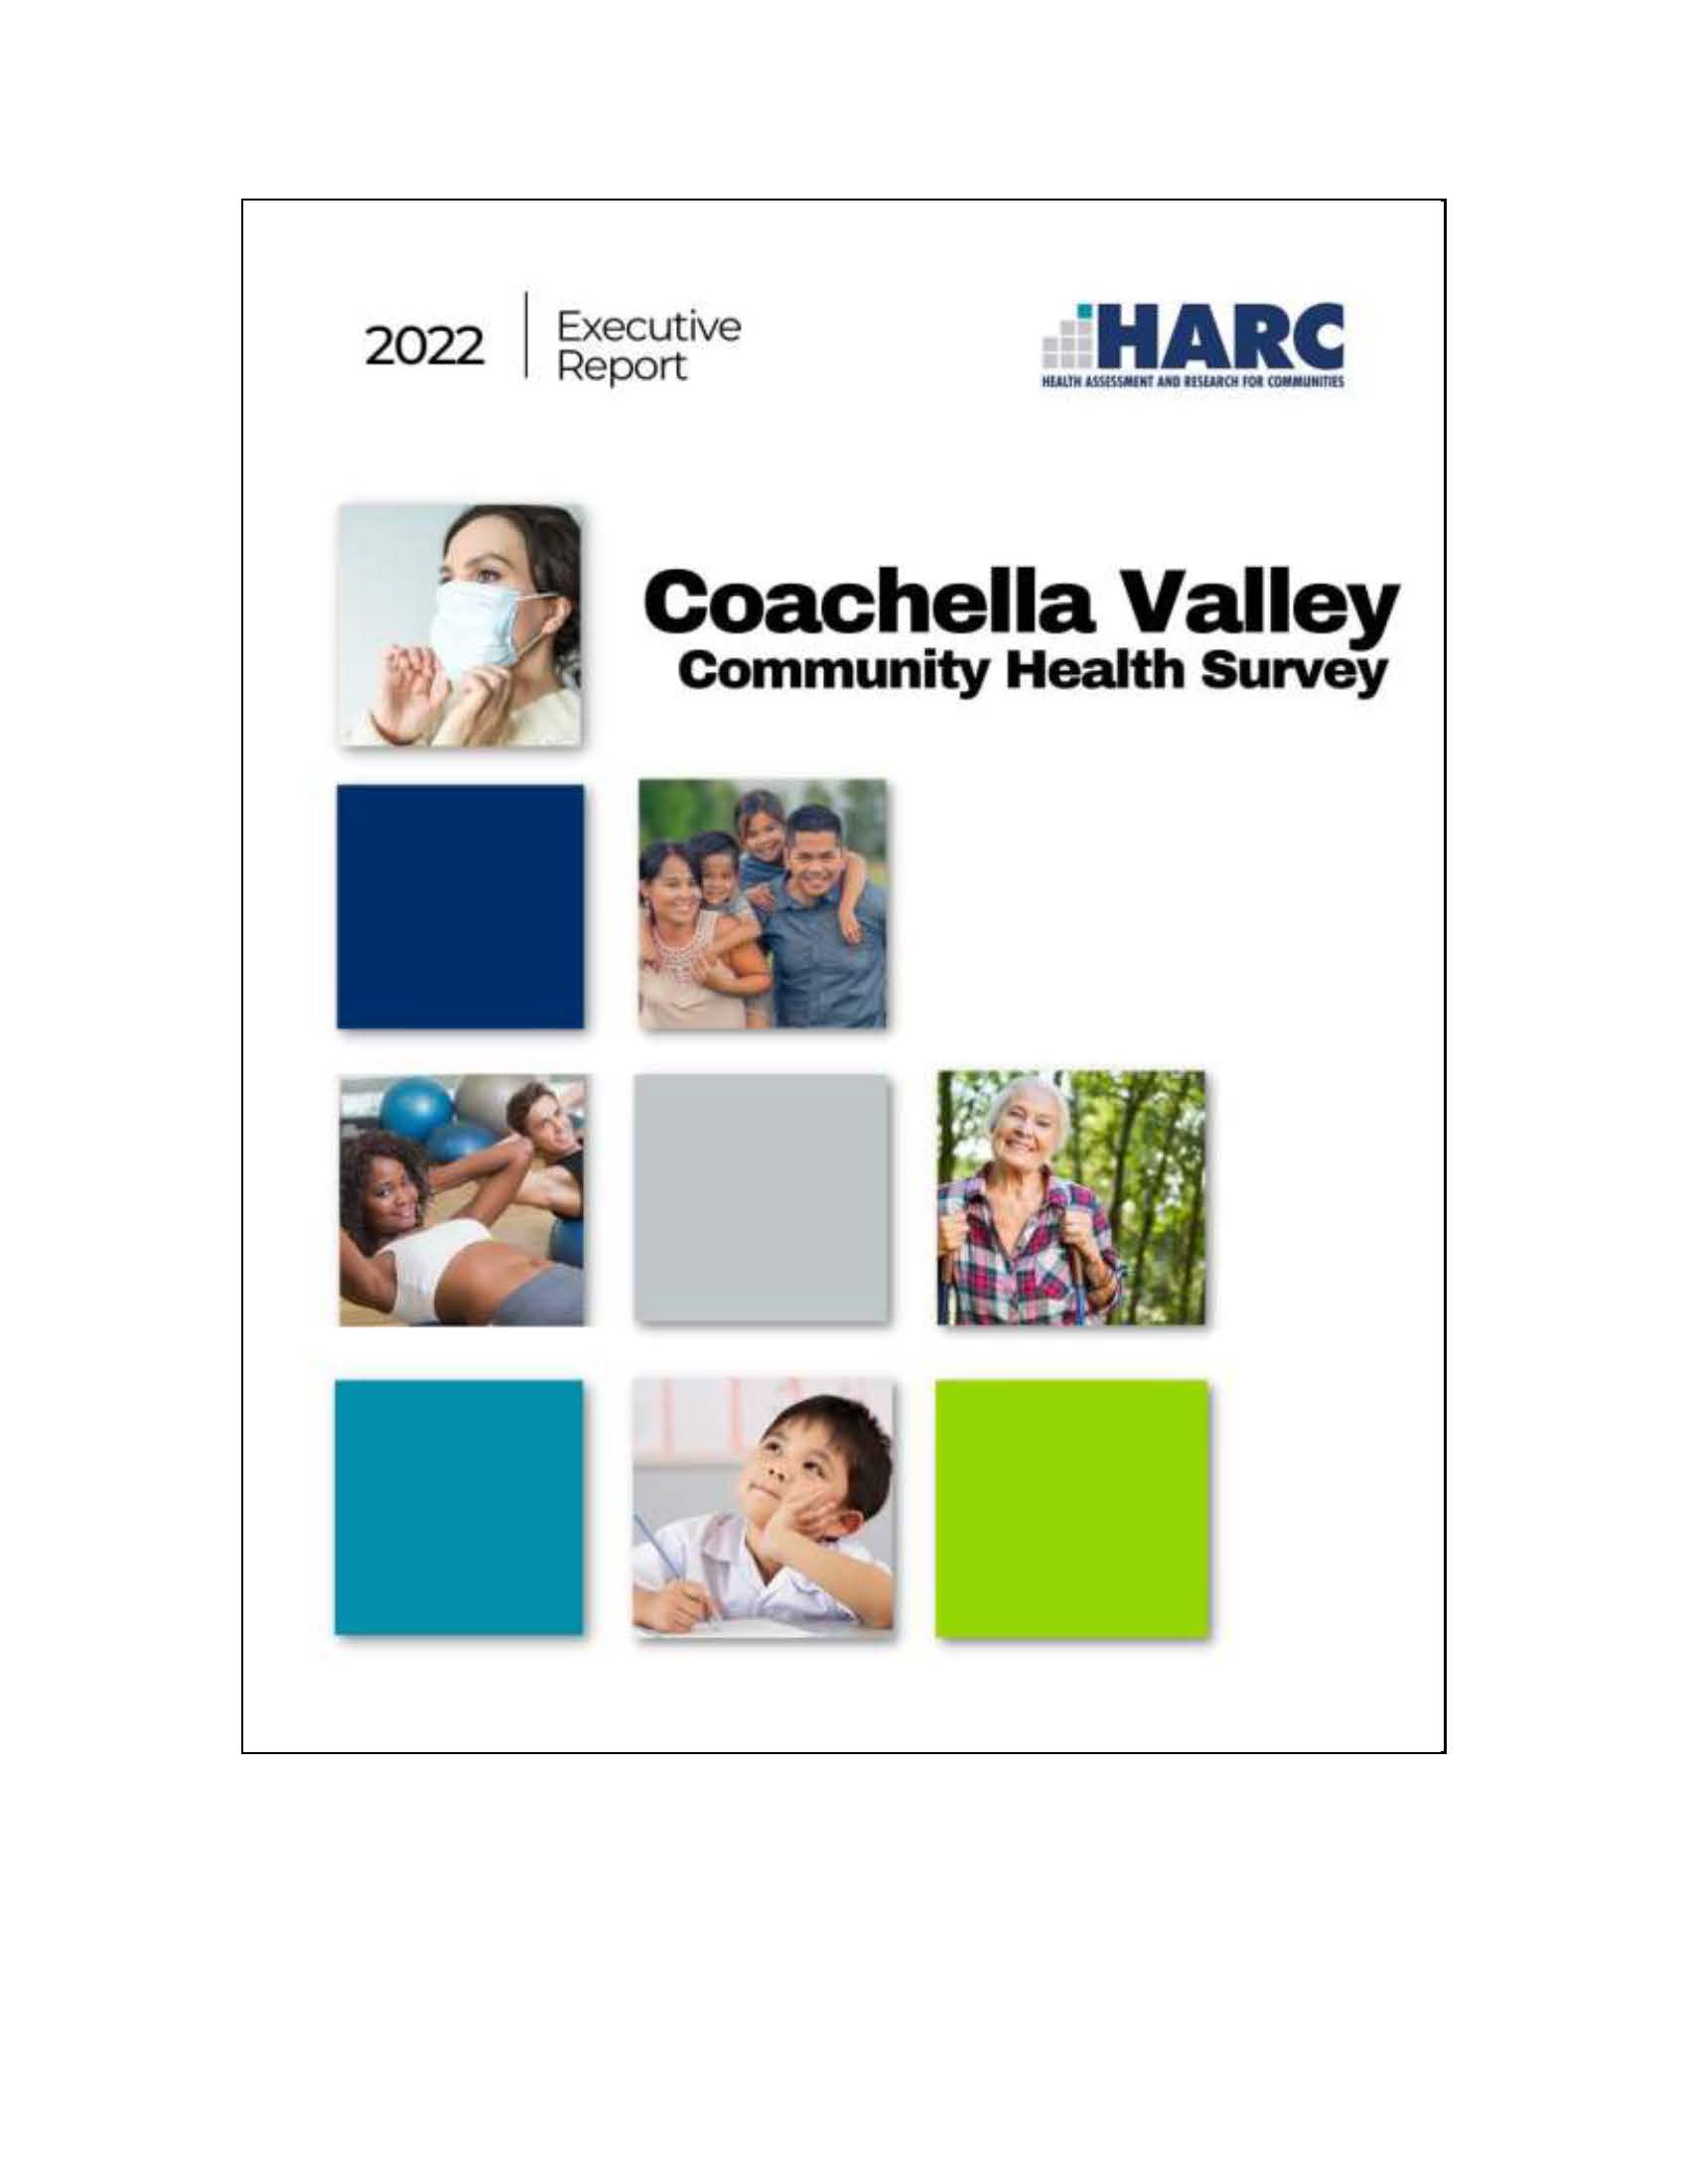 2022-HARC-Executive-Report-cover